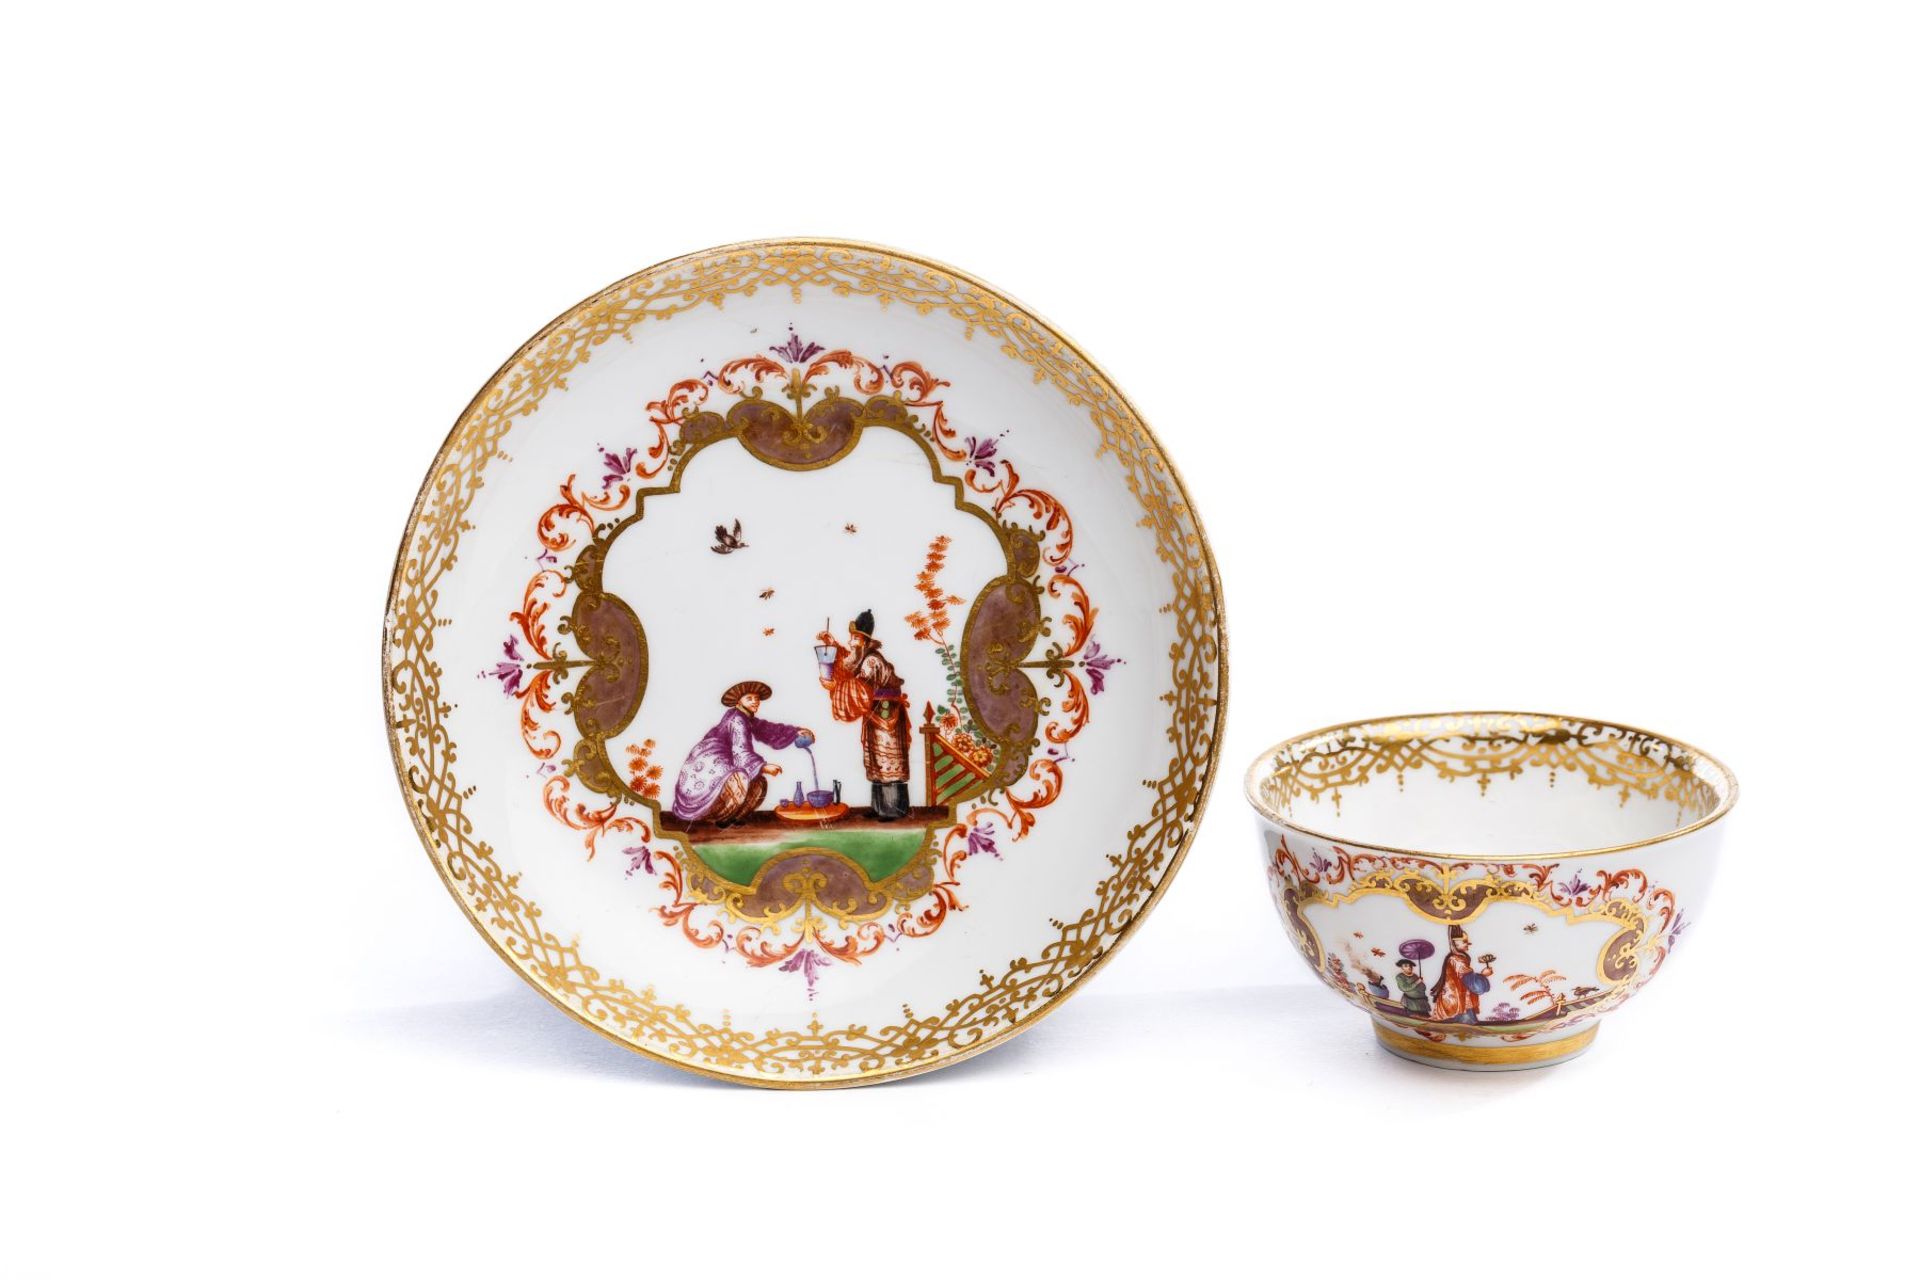 Bowl with Saucer, Meissen 1723/25